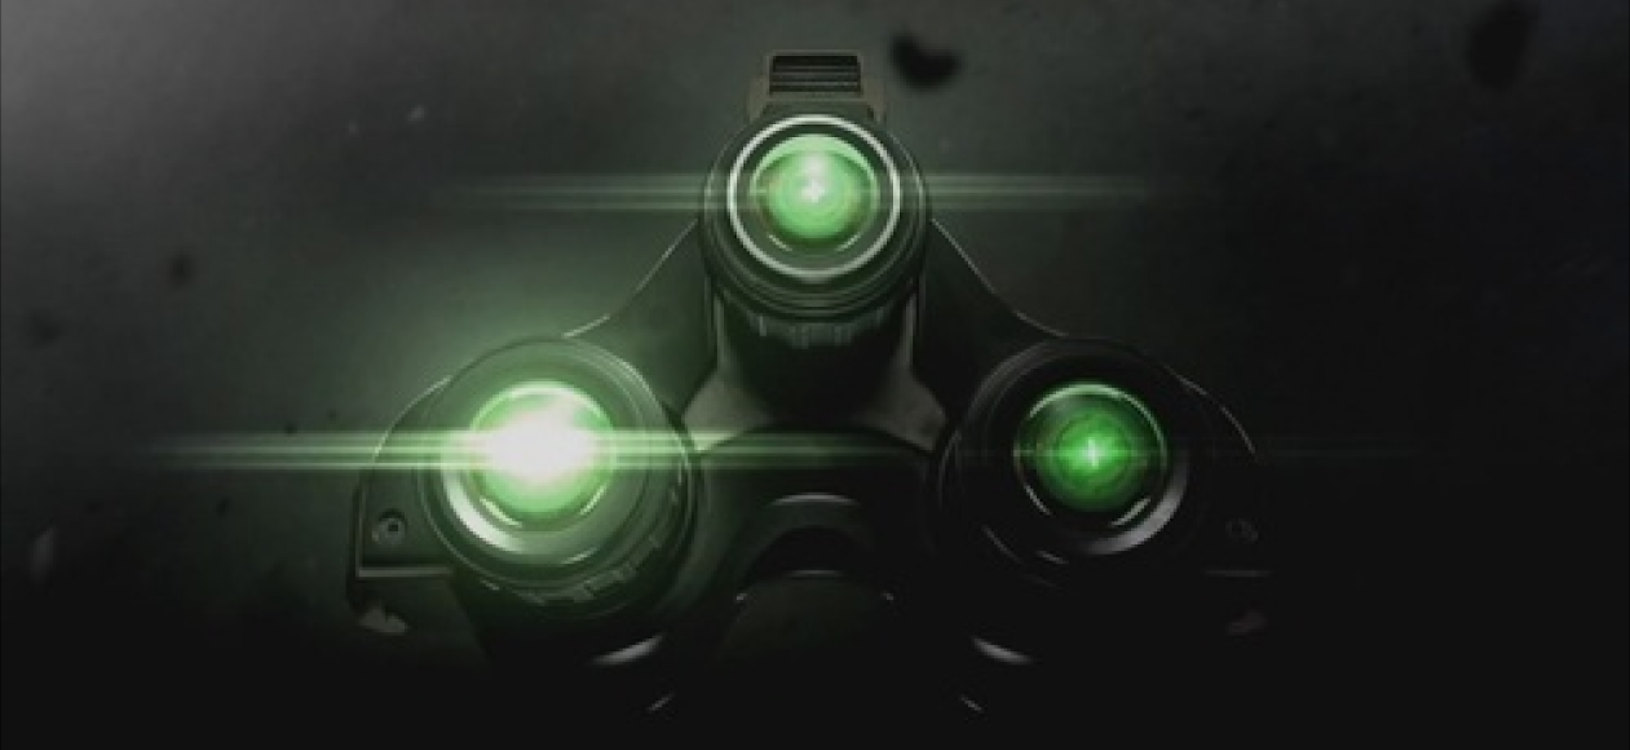 Night vision in video games and movies. Part II.